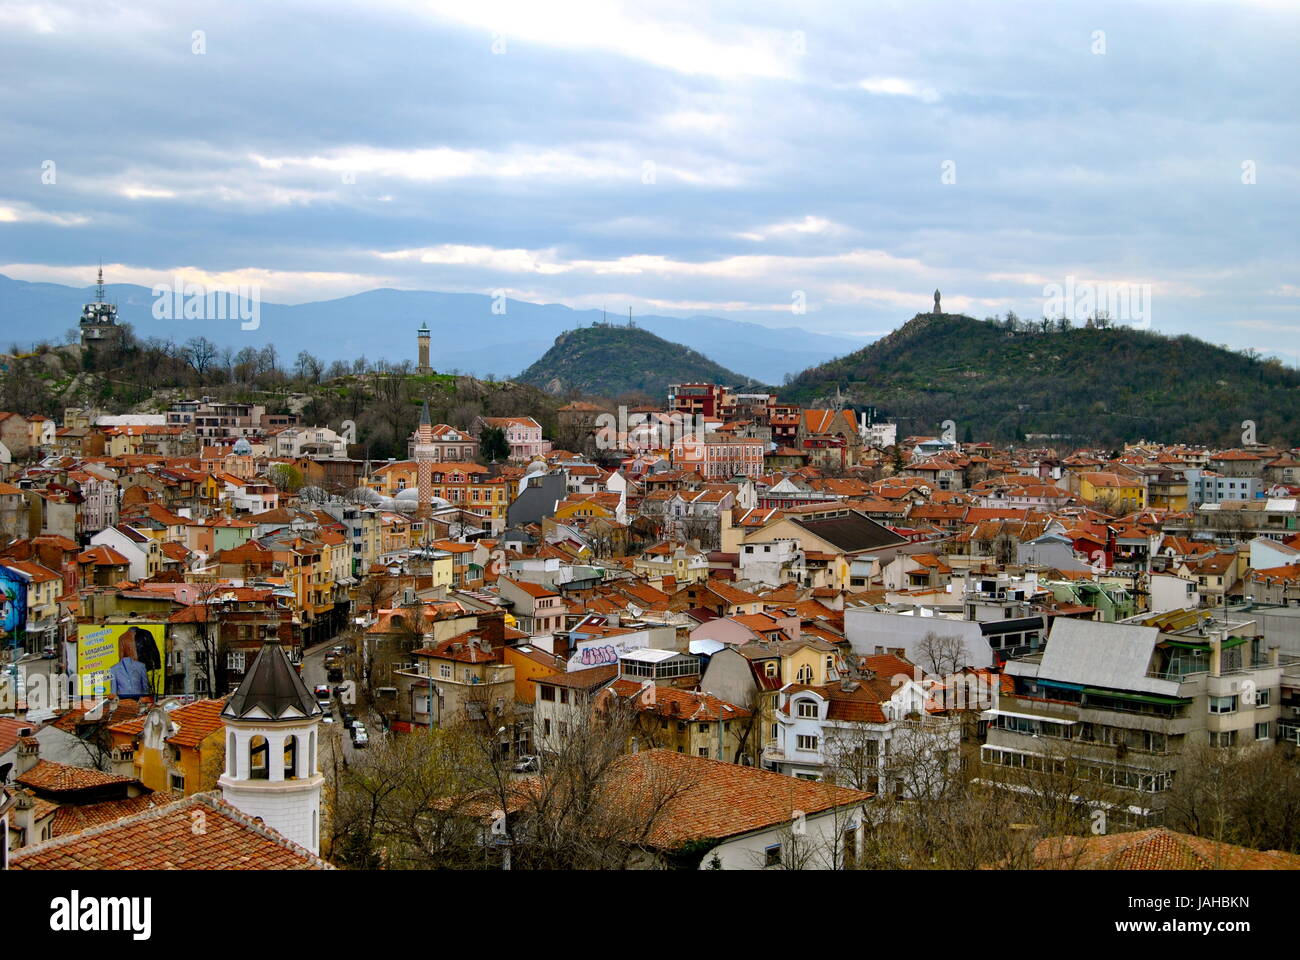 A view of Plovdiv city, Bulgaria Stock Photo